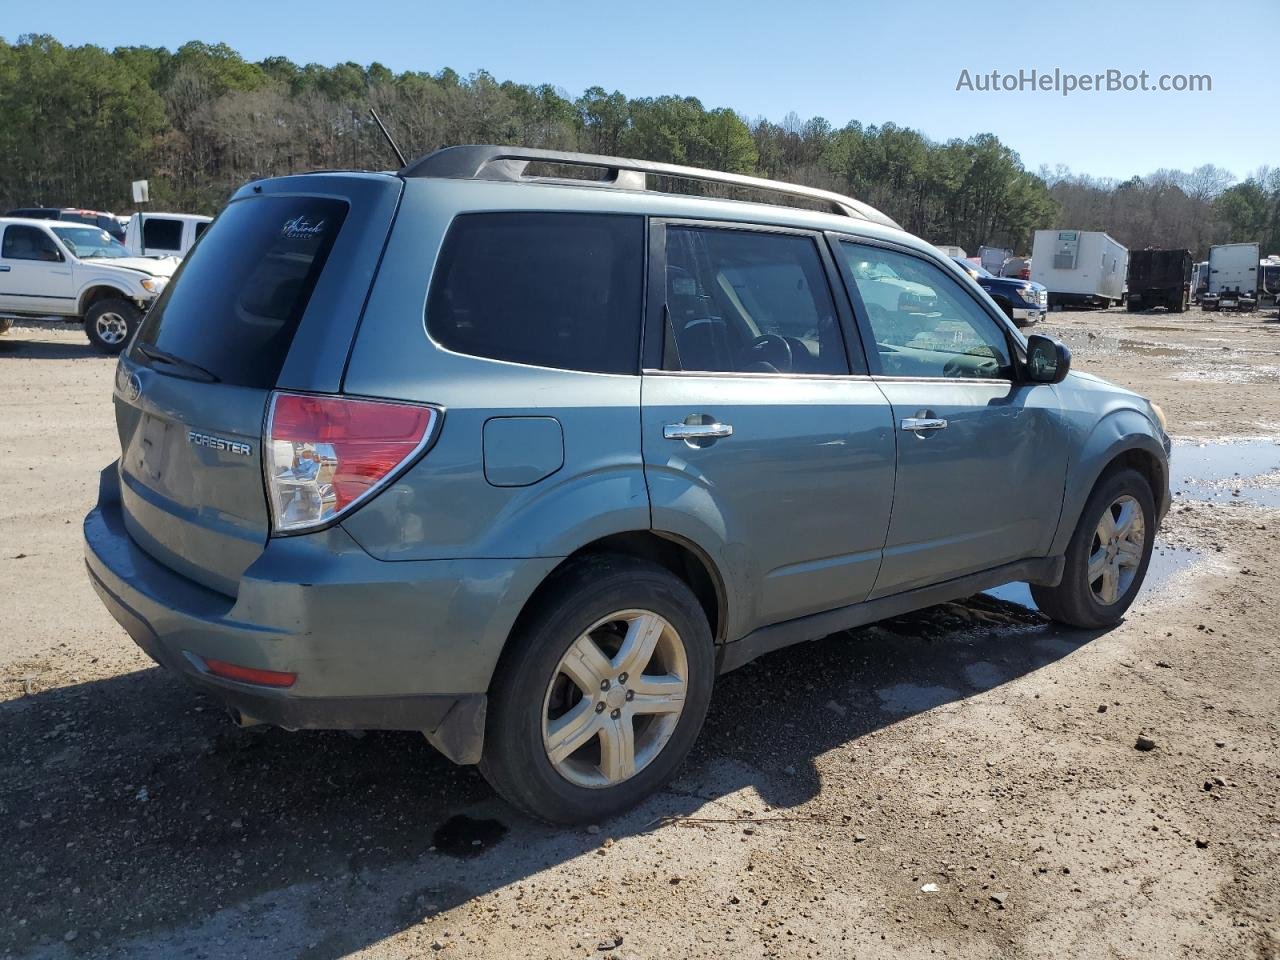 2009 Subaru Forester 2.5x Limited Turquoise vin: JF2SH64619H761820